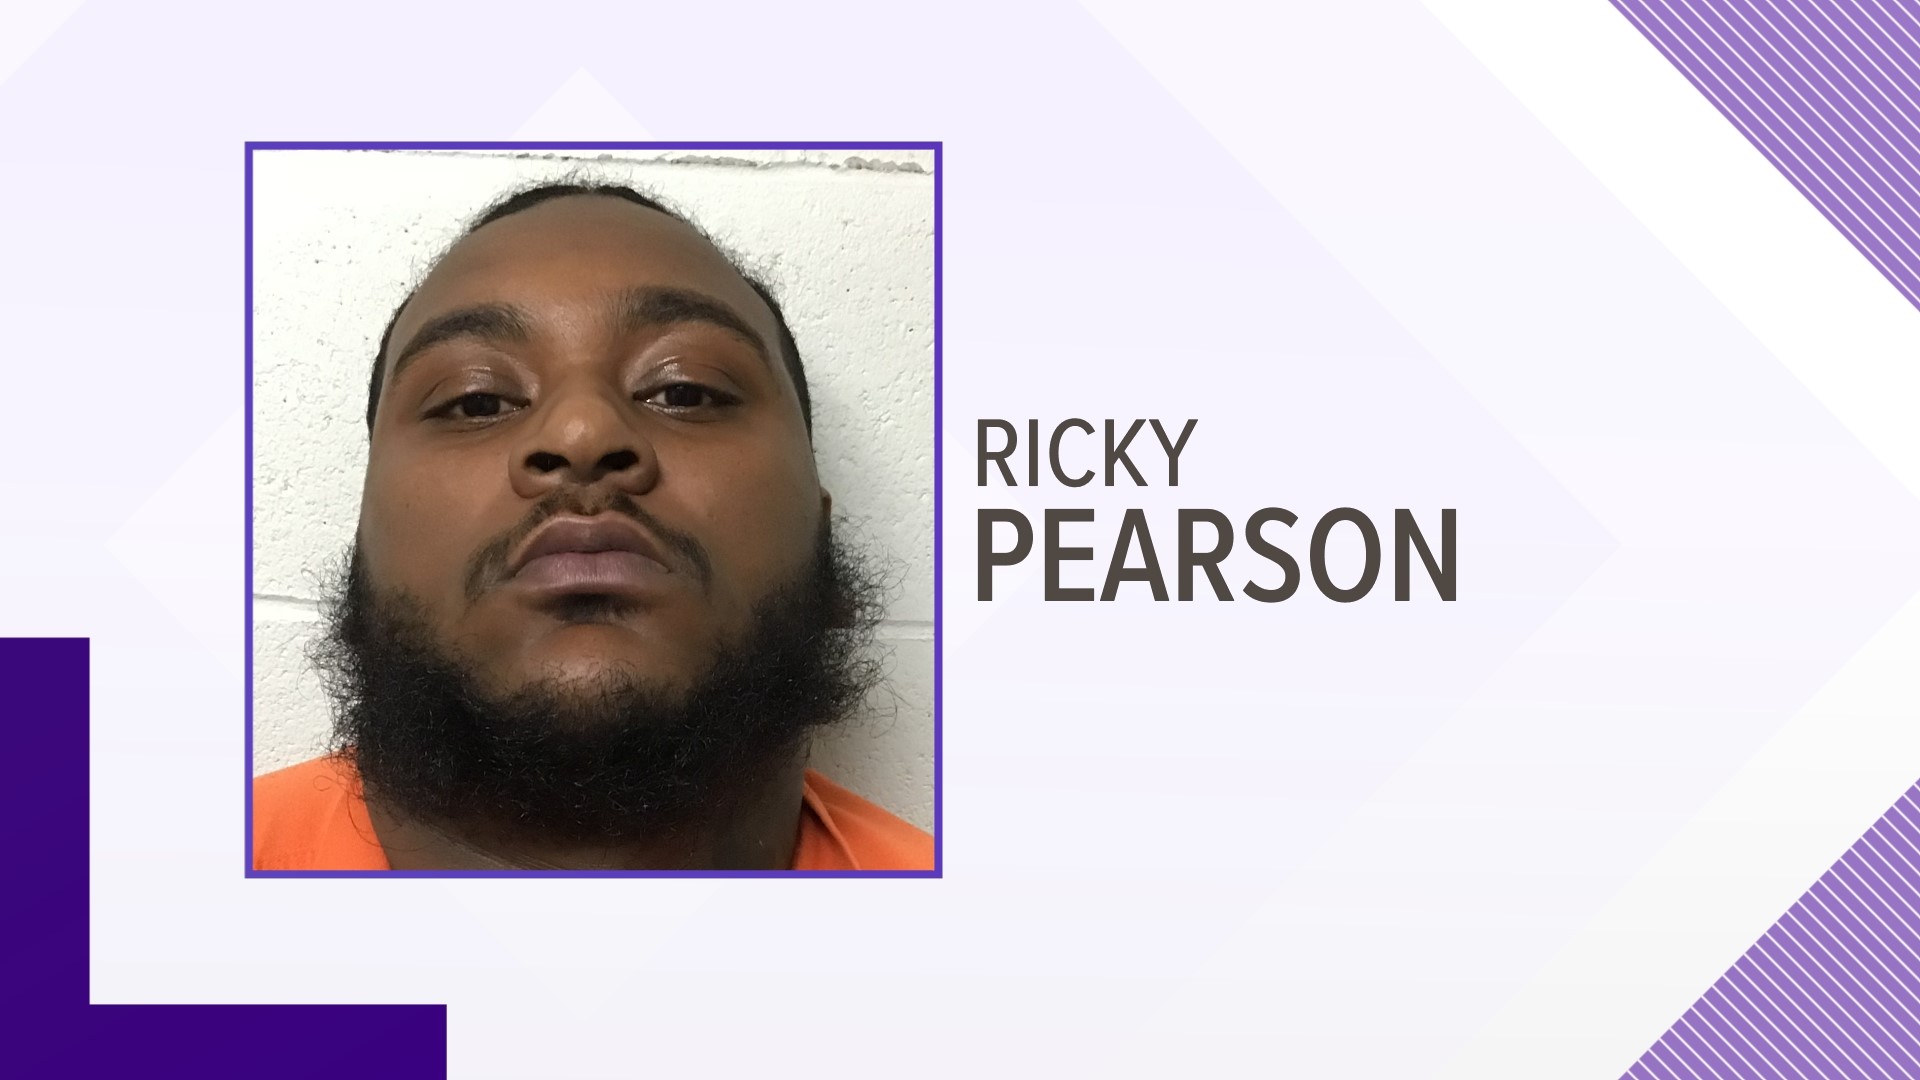 Ricky Pearson is just one of three charged in the attempted homicide.